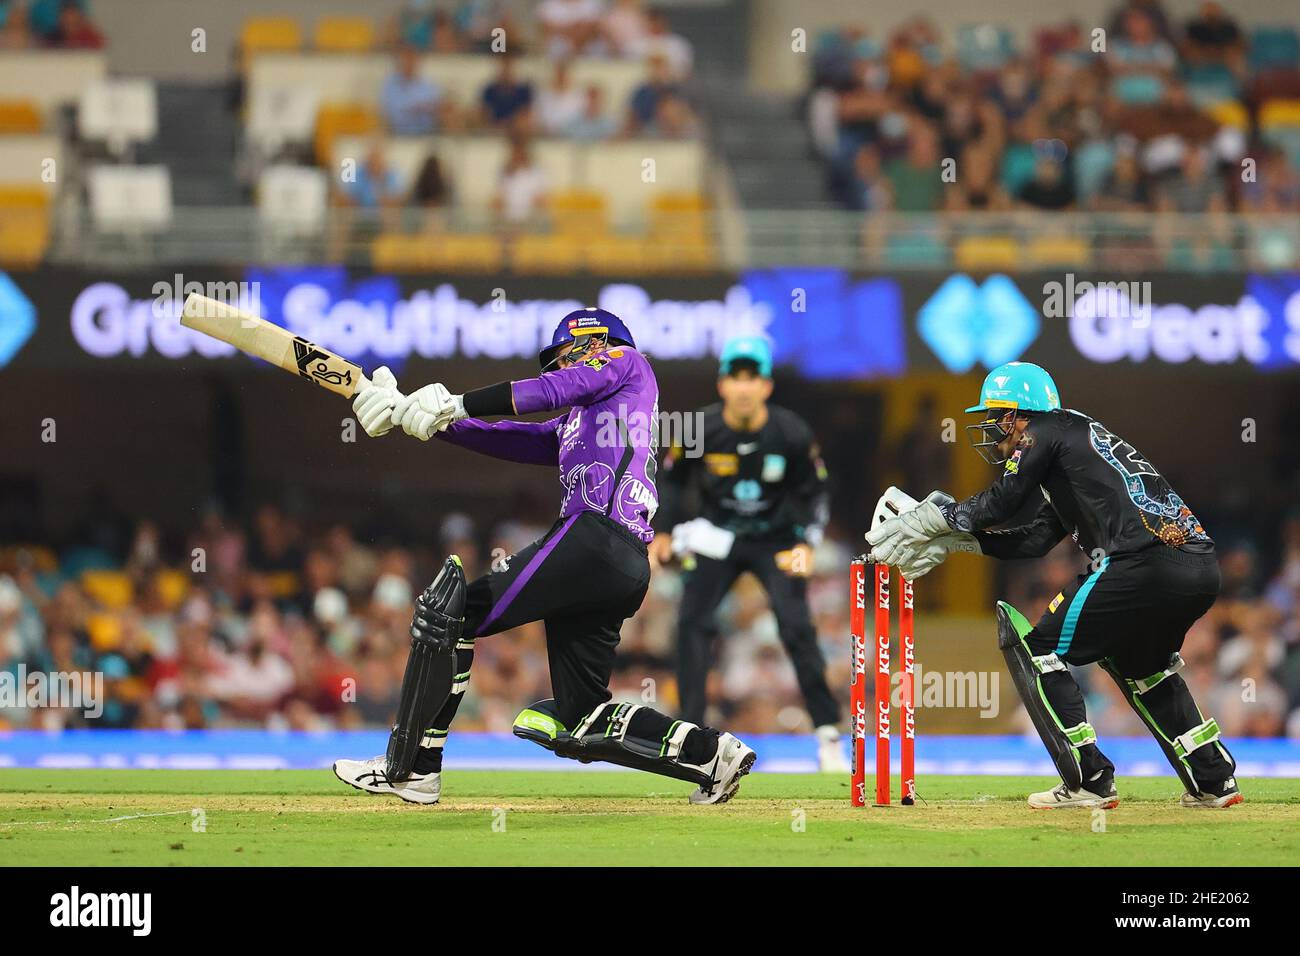 Peter Handscomb of the Hobart Hurricanes plays a leg side shot  in Brisbane, United Kingdom on 1/8/2022. (Photo by Patrick Hoelscher/News Images/Sipa USA) Stock Photo